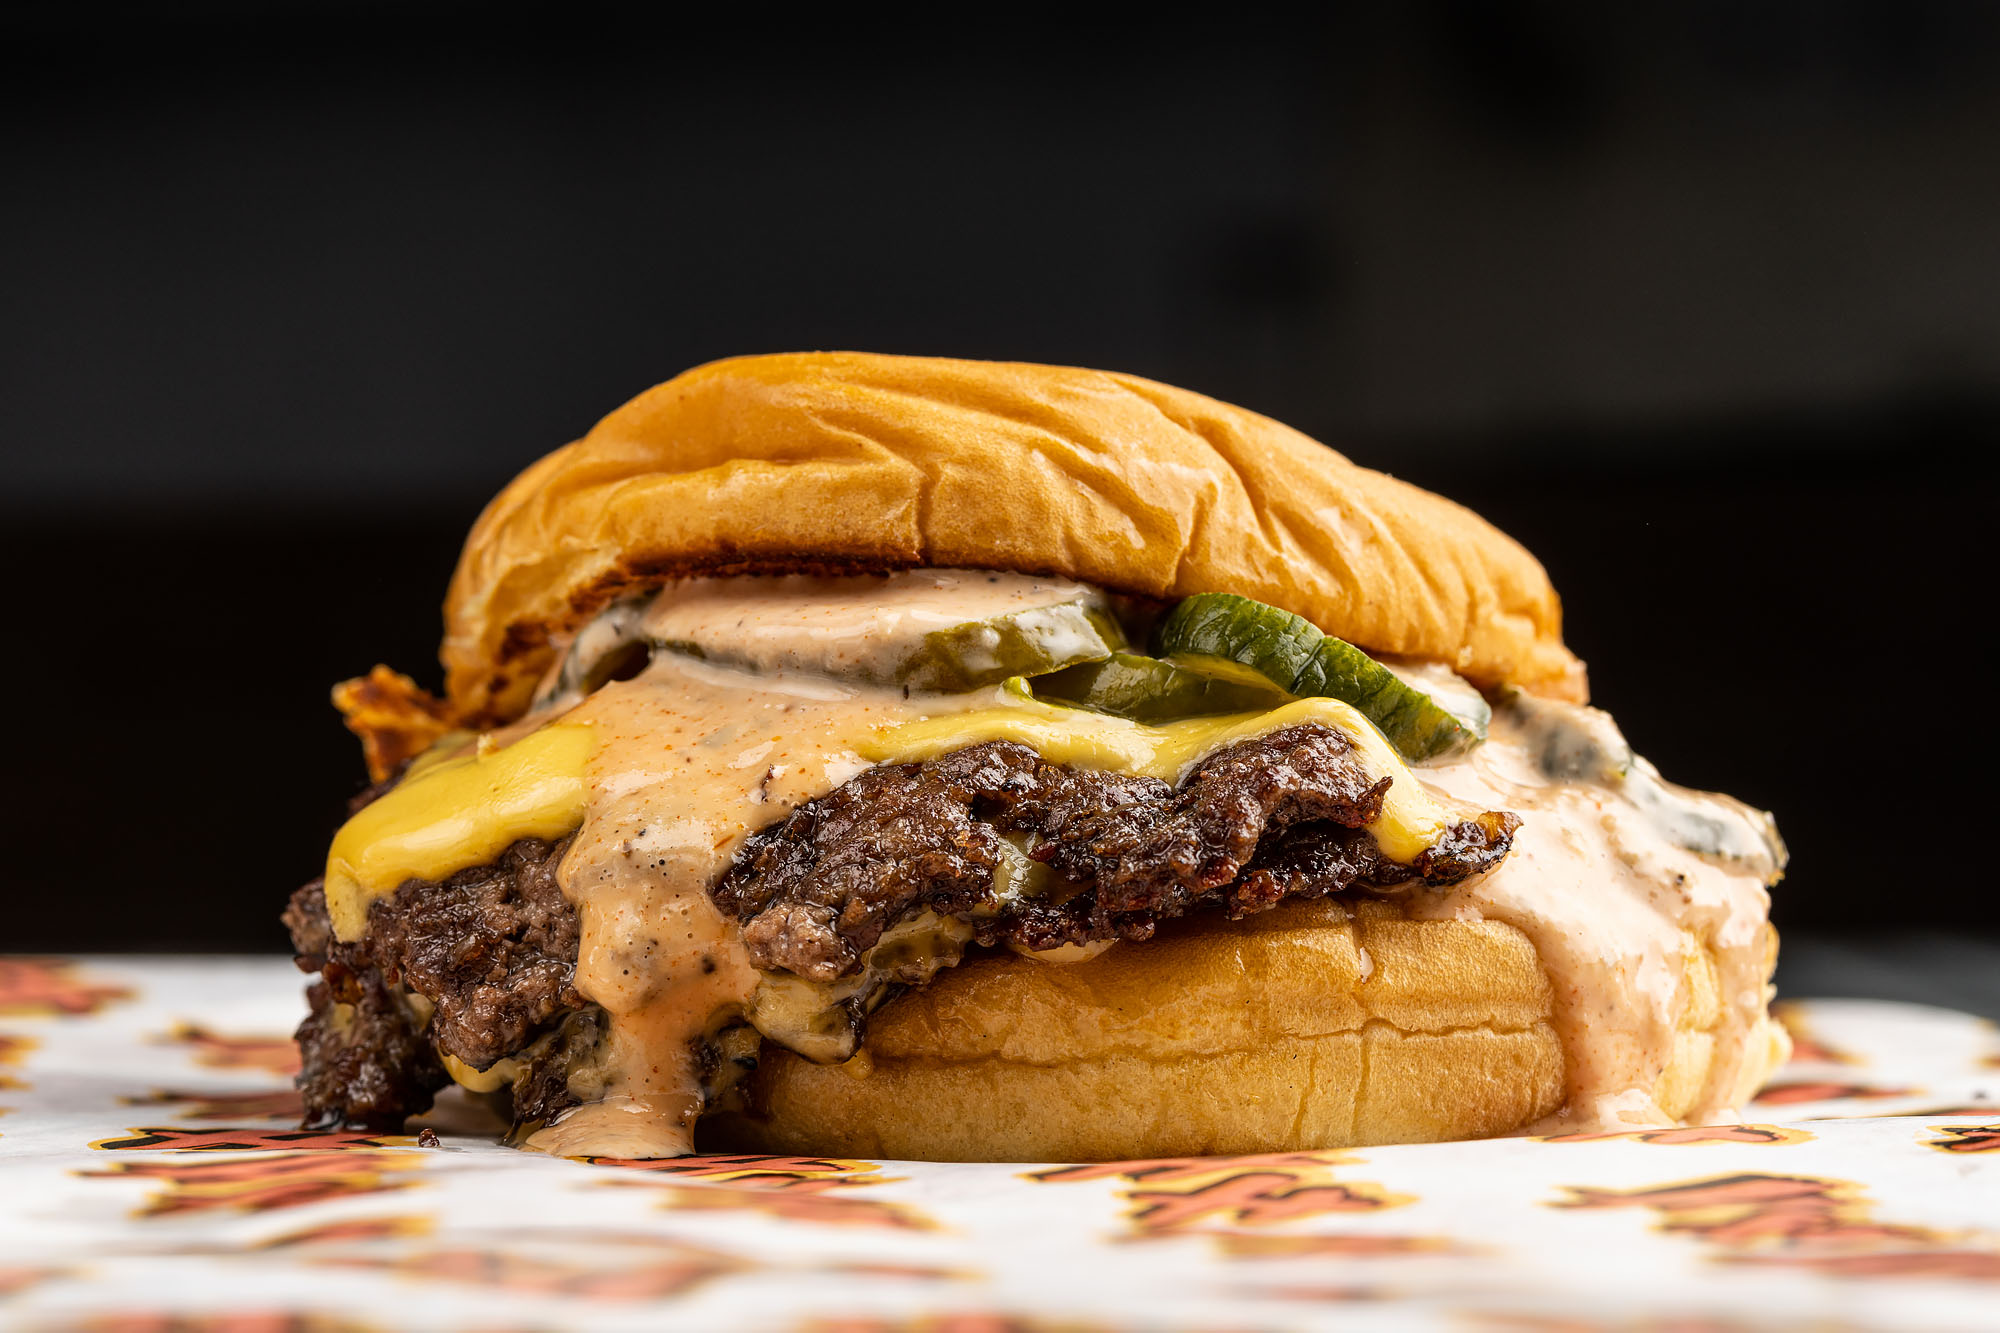 A cheeseburger topped with pickles, sauce, and caramelized onions from Heavy Handed.